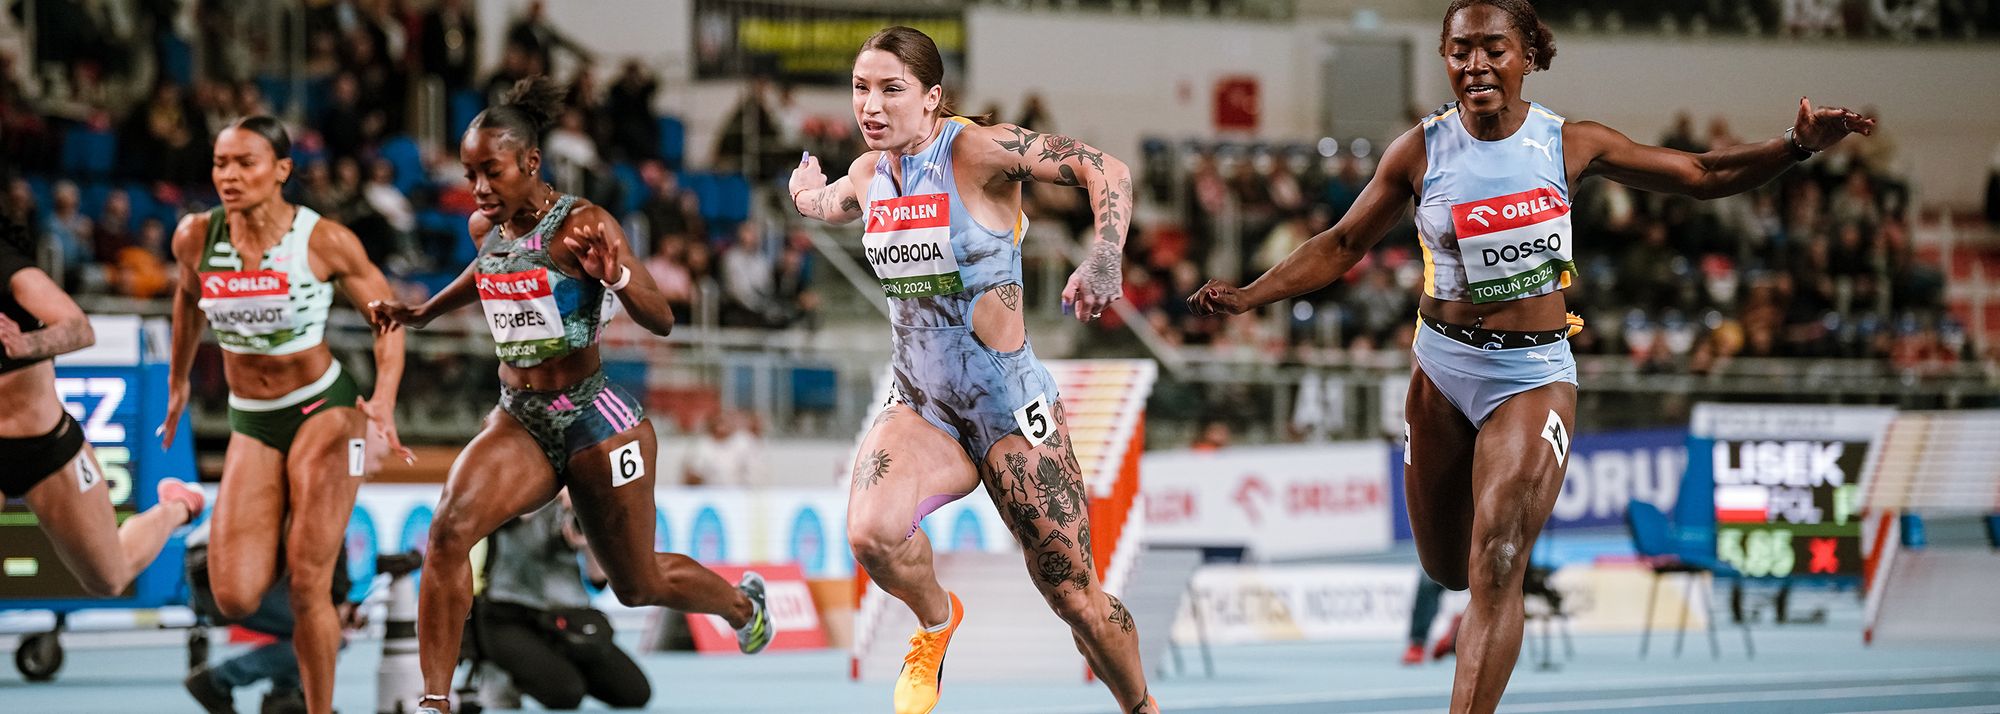 Polish sprint queen Ewa Swoboda set a world lead in the women’s 60m on a pulsating evening at the ORLEN Copernicus Cup in Torun